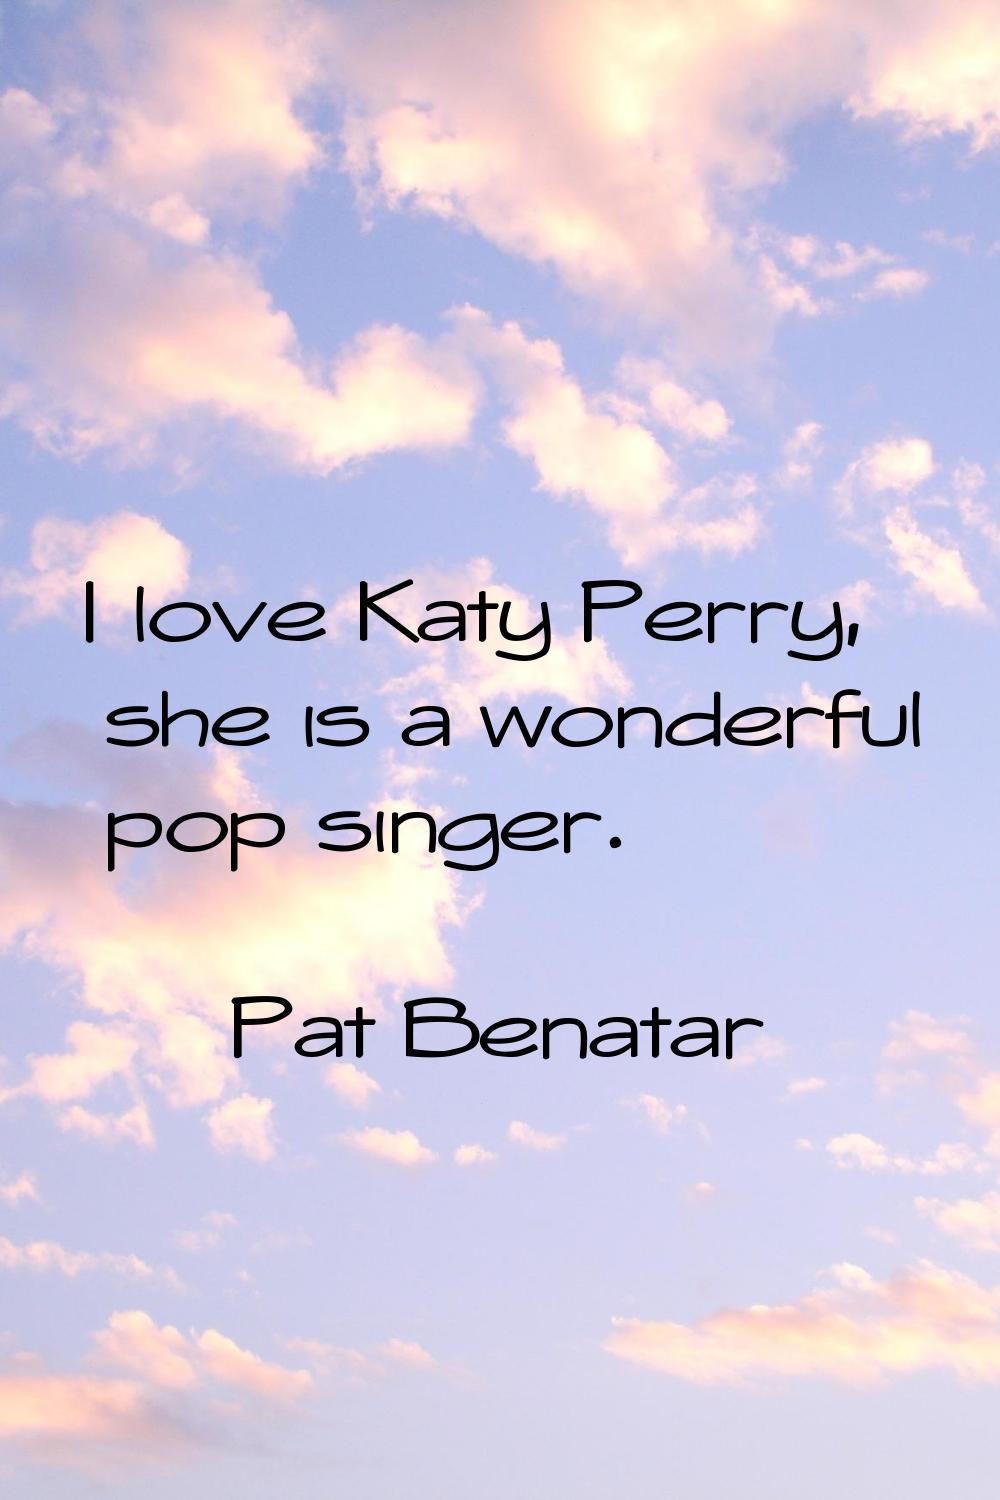 I love Katy Perry, she is a wonderful pop singer.